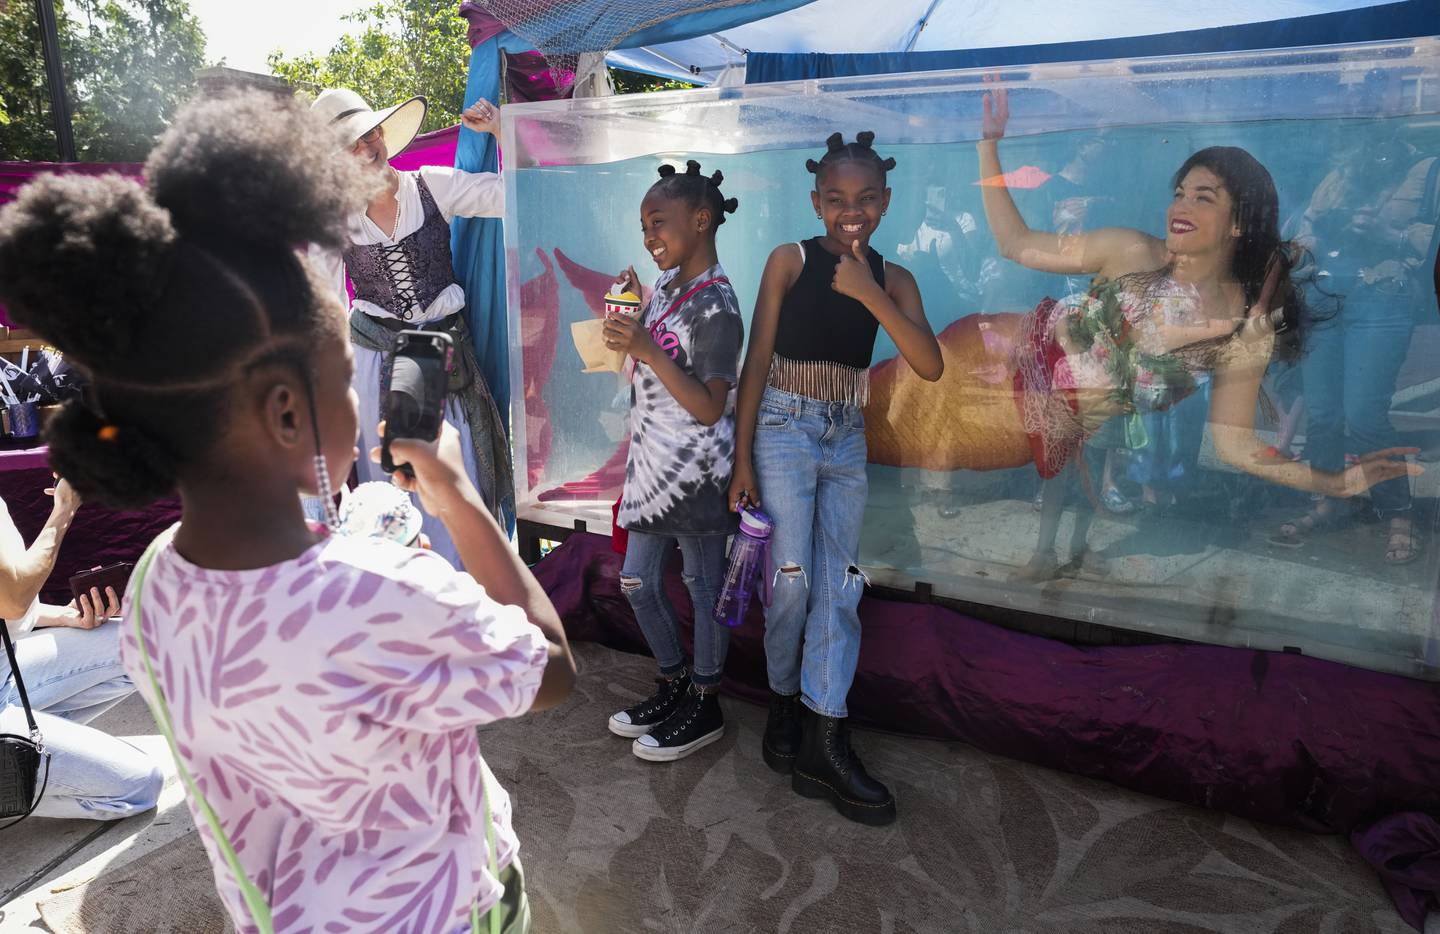 Laila Riley, 10, and Laci Riley, 7,  gather to see the "mermaid" at the Rotunda, courtesy of Circus Siren Pod, before the premiere of the Little Mermaid movie on May 27, 2023.